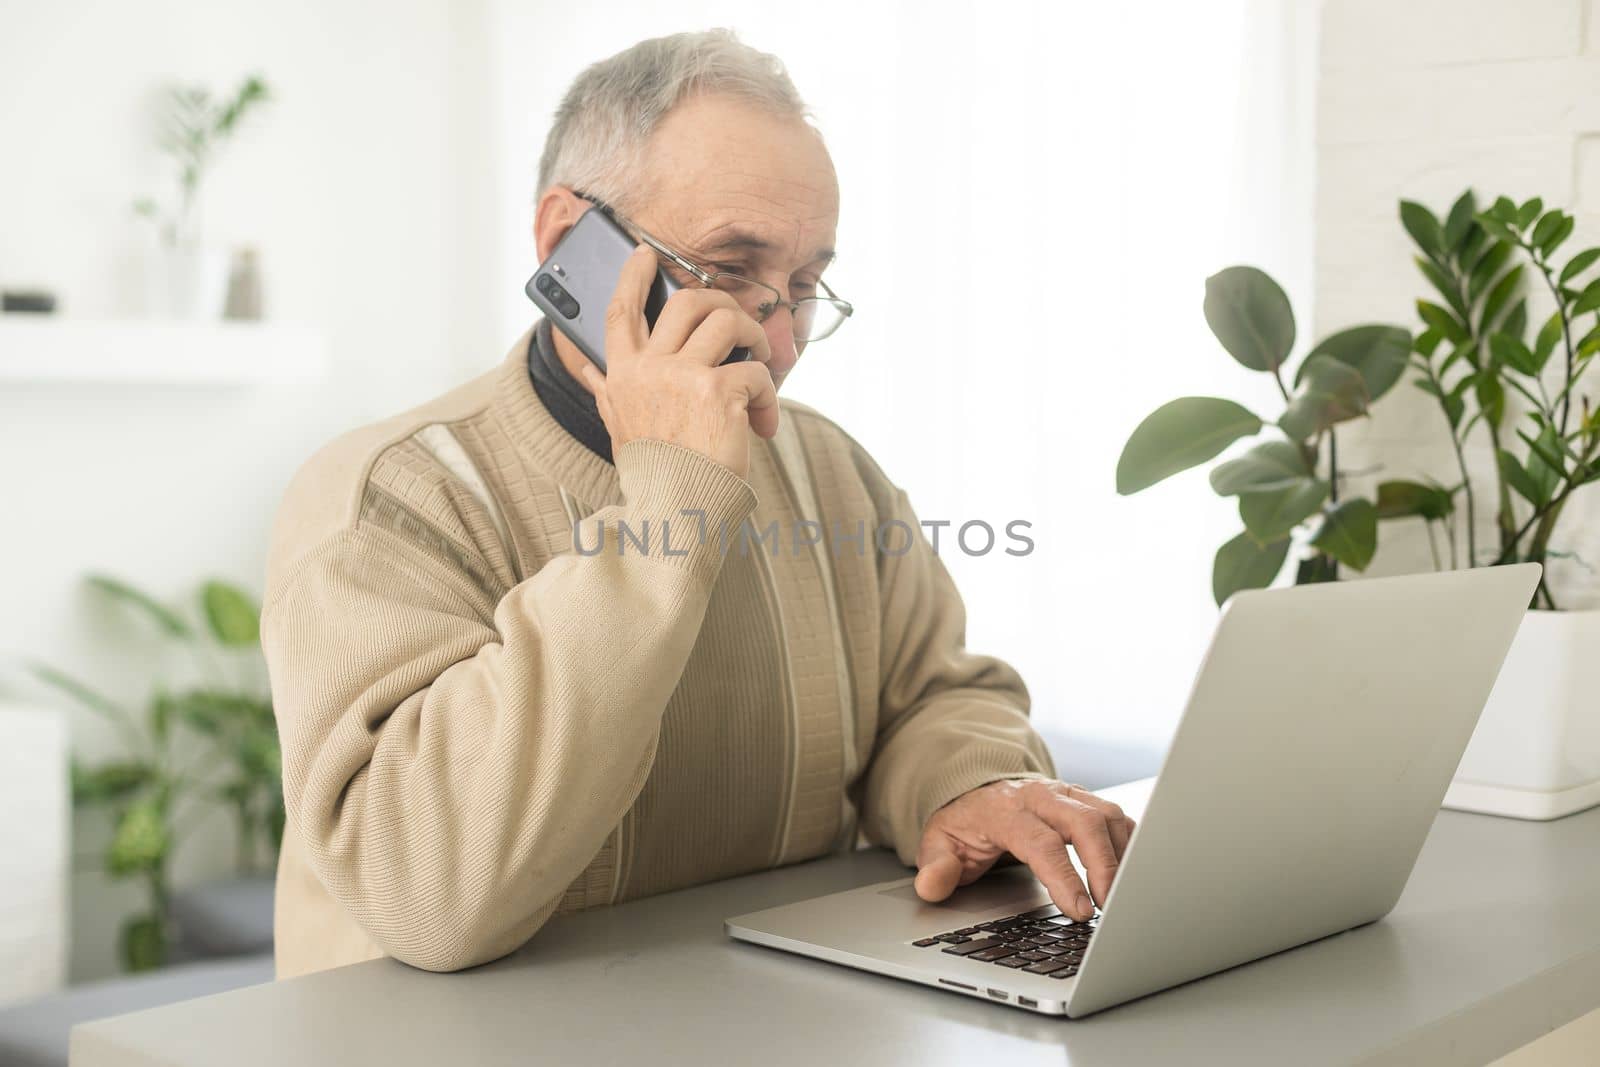 Handsome smiling senior man wearing glasses using mobile phone while sitting at his cozy workplace with laptop at home, retired male chatting with friends in social media, typing on smartphone